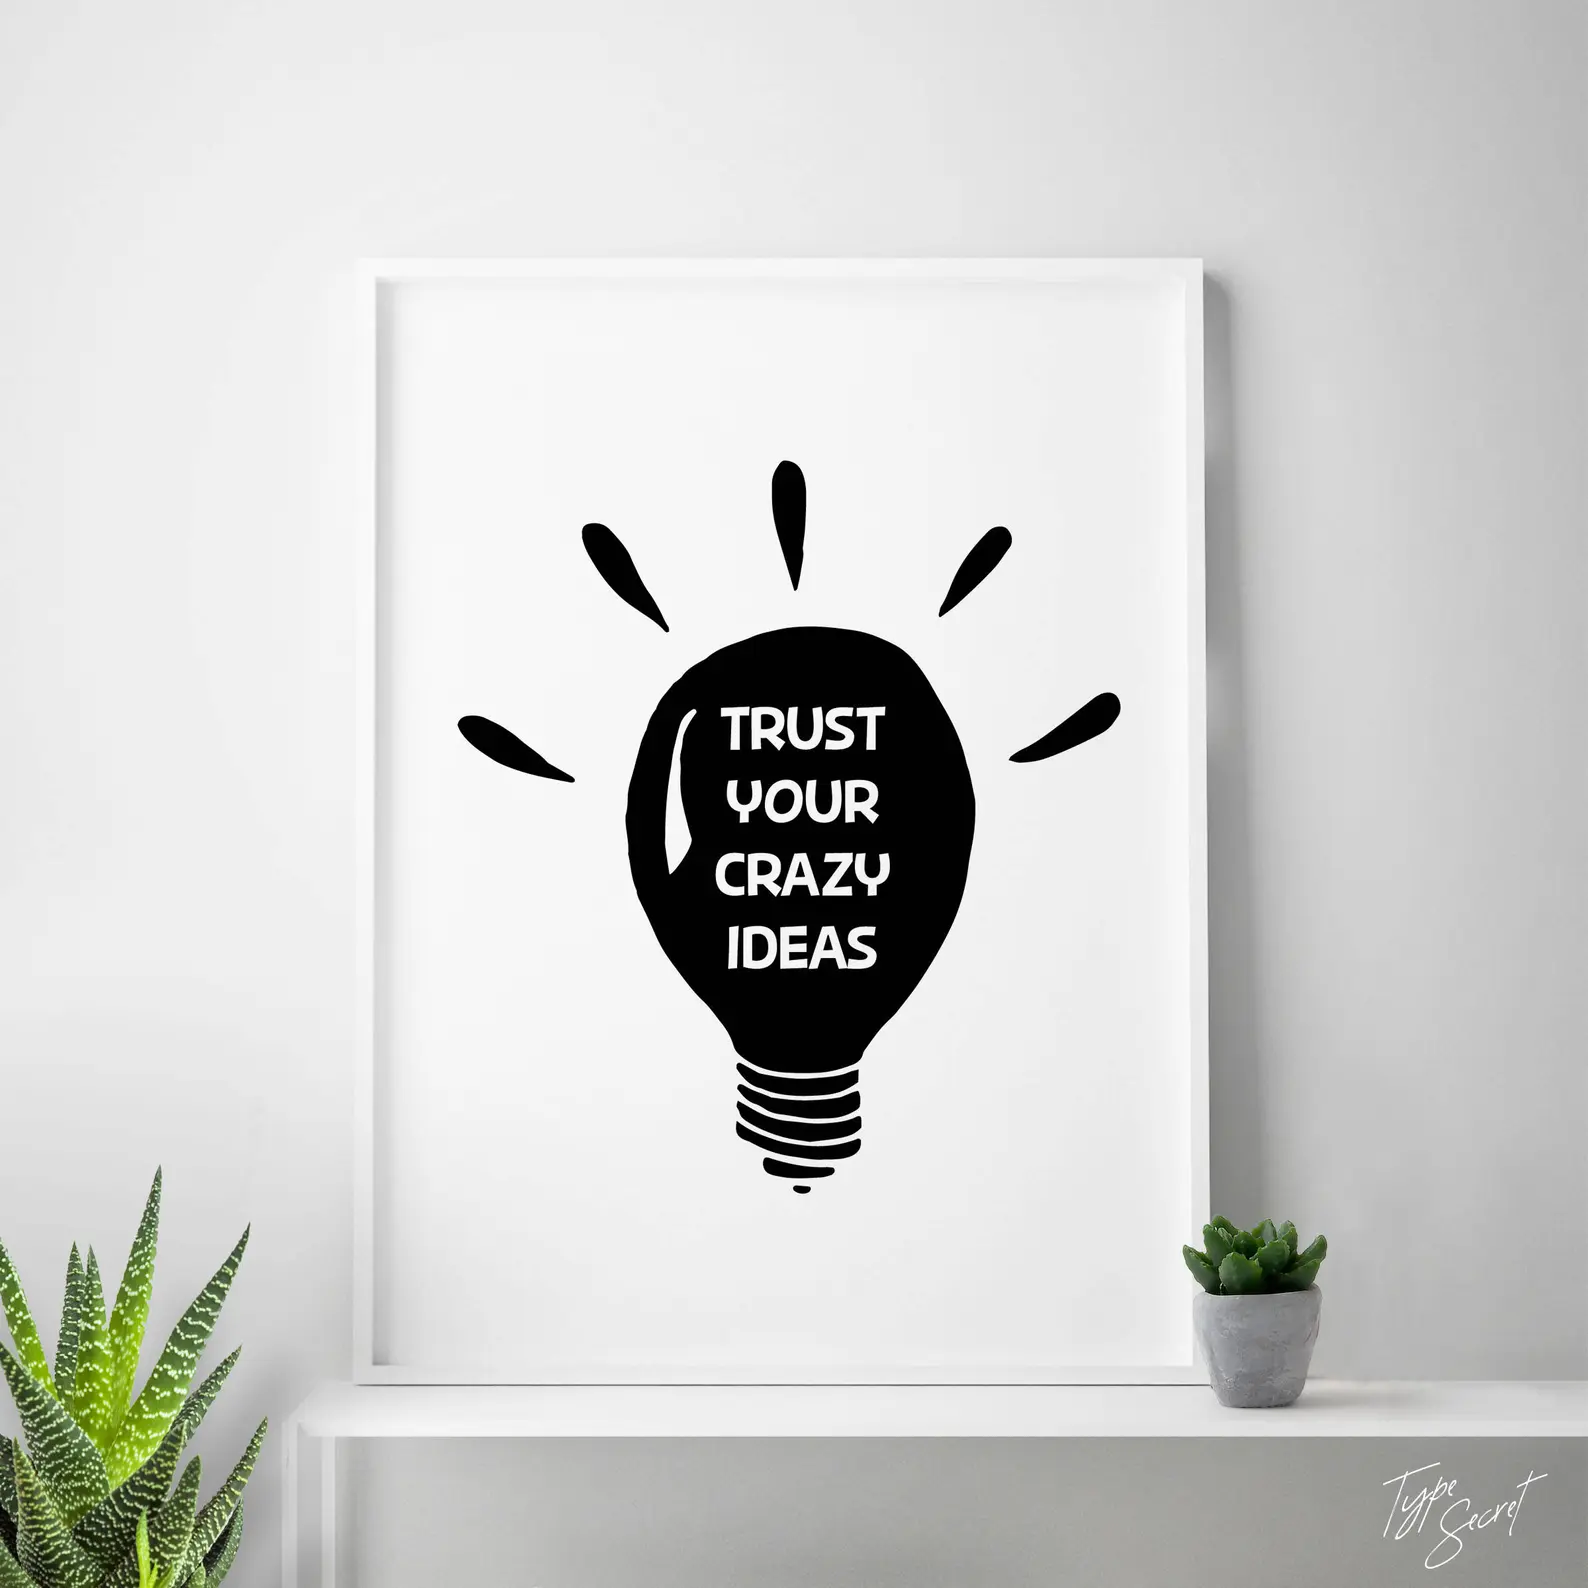 trust your crazy ideas, inspirational posters